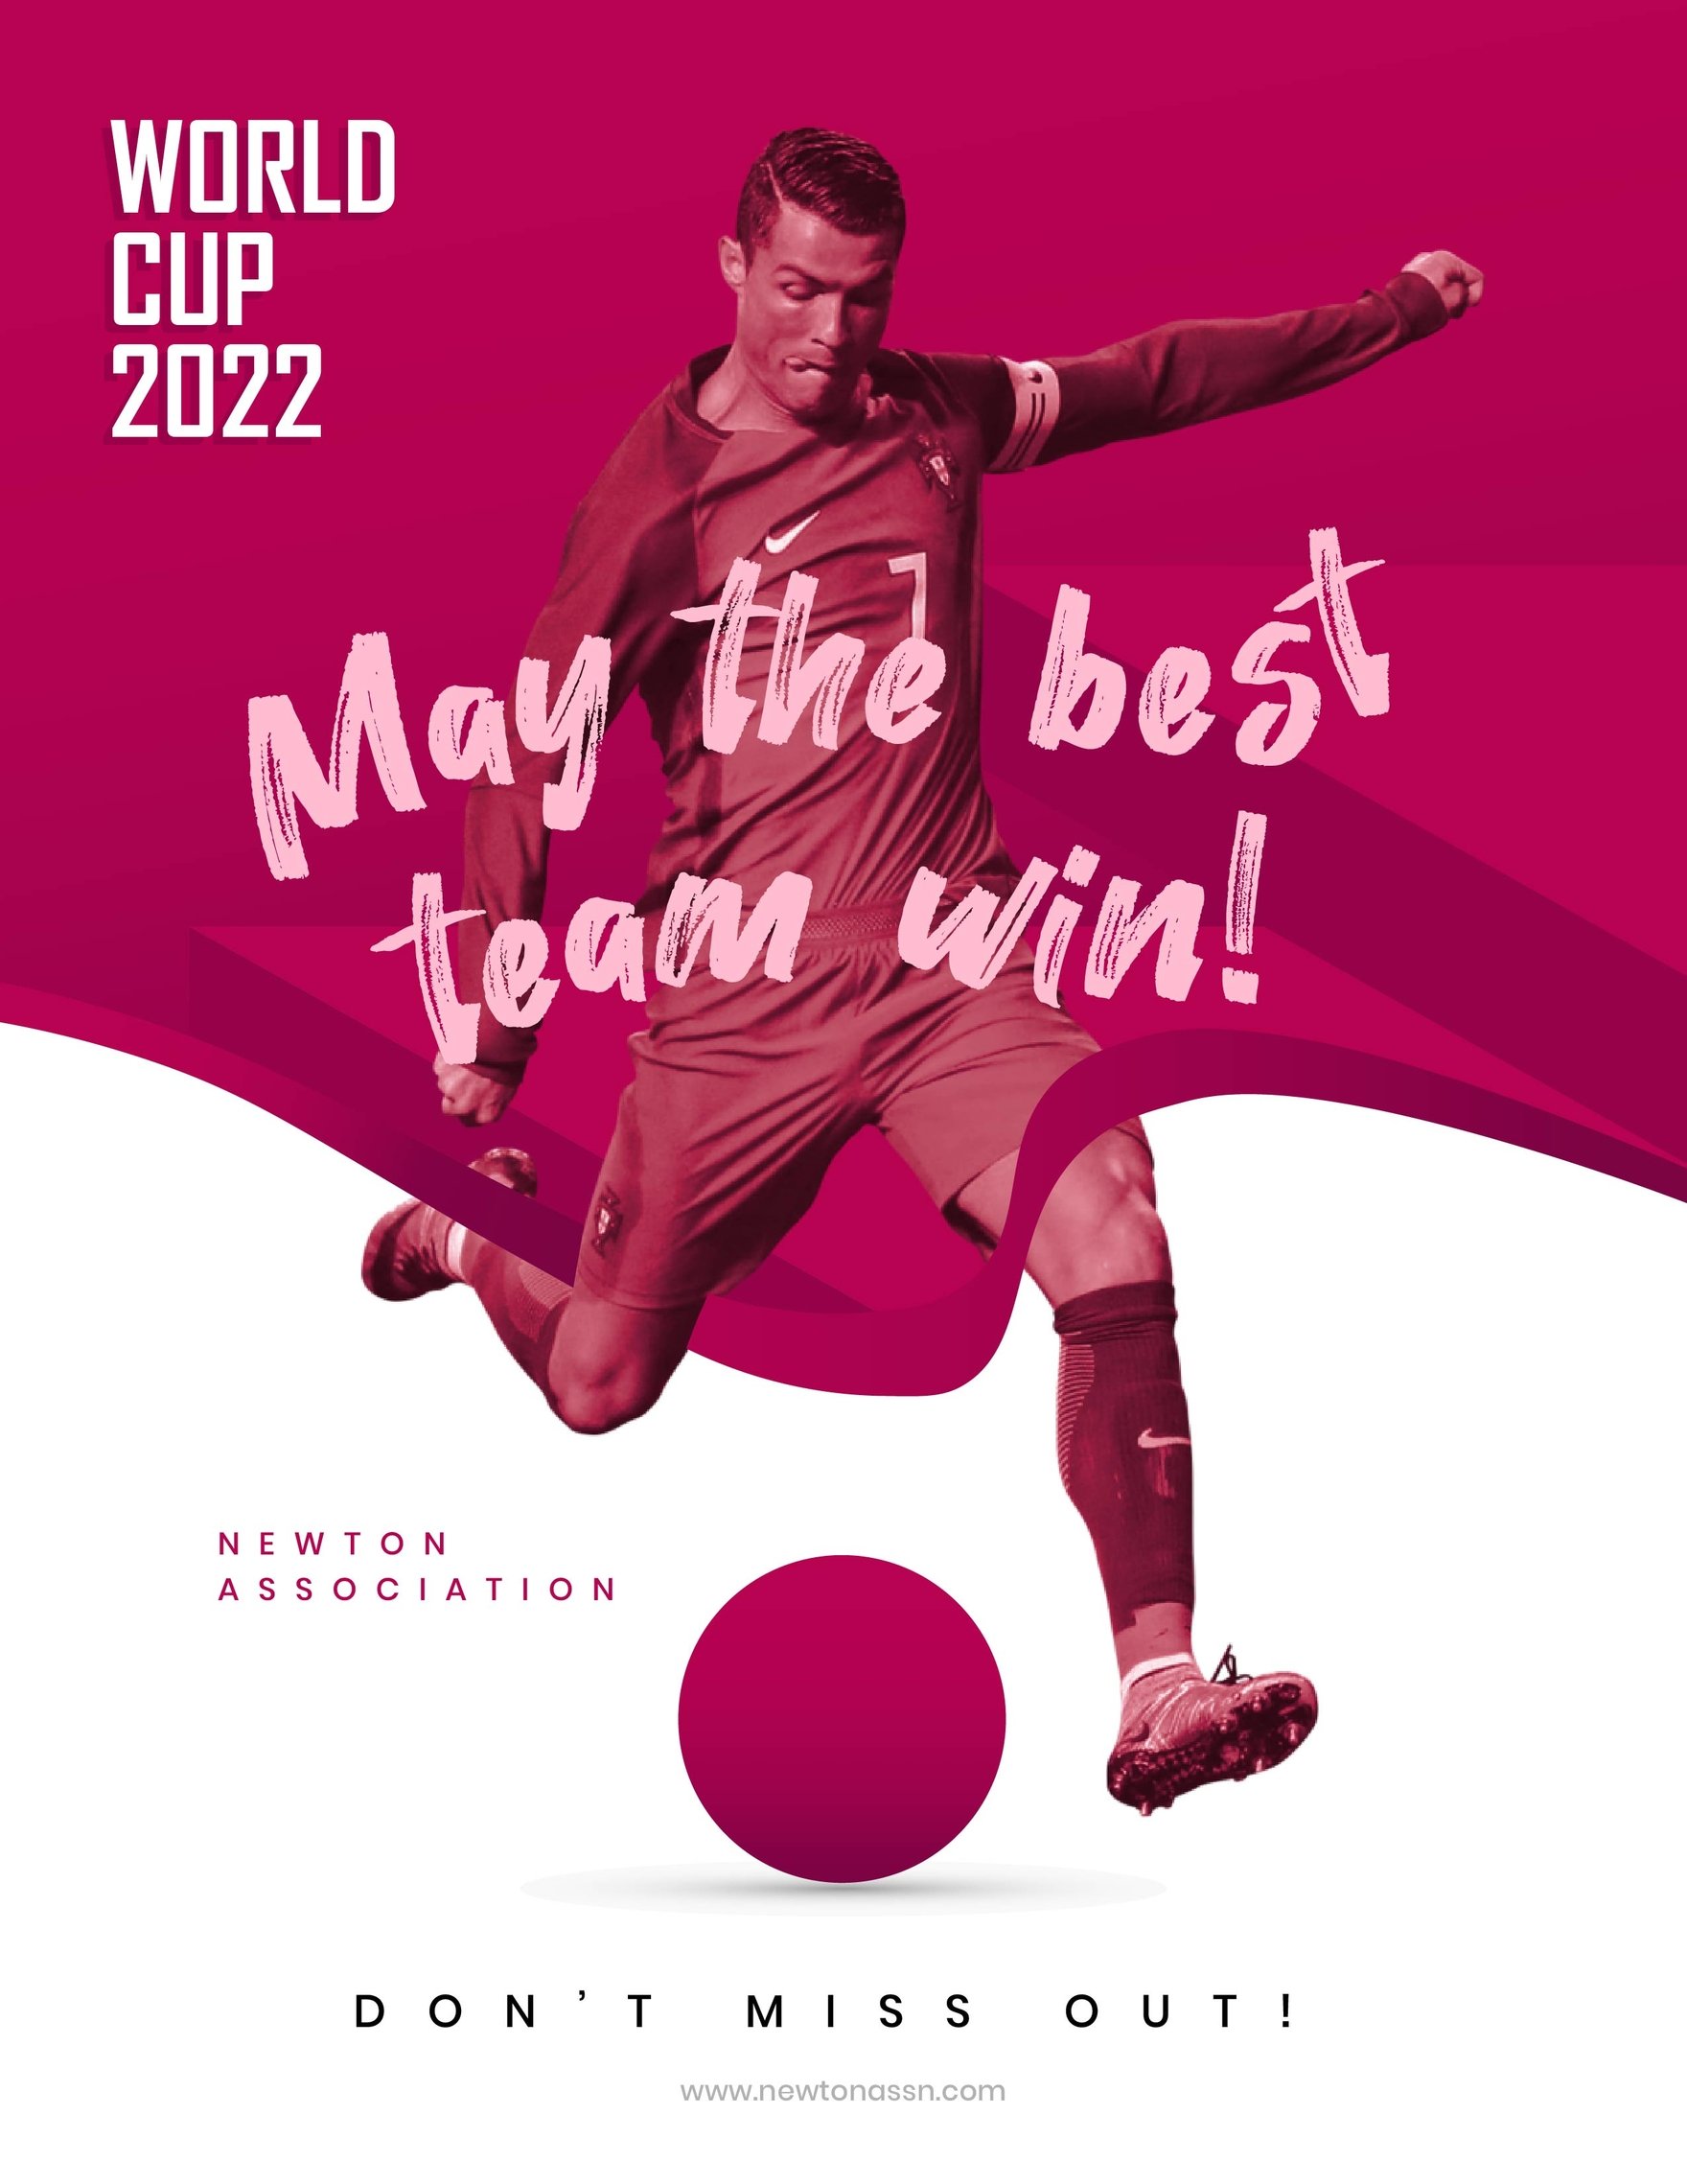 World Cup 2022 Flyer in Word, Google Docs, Illustrator, PSD, Apple Pages, Publisher, EPS, PNG